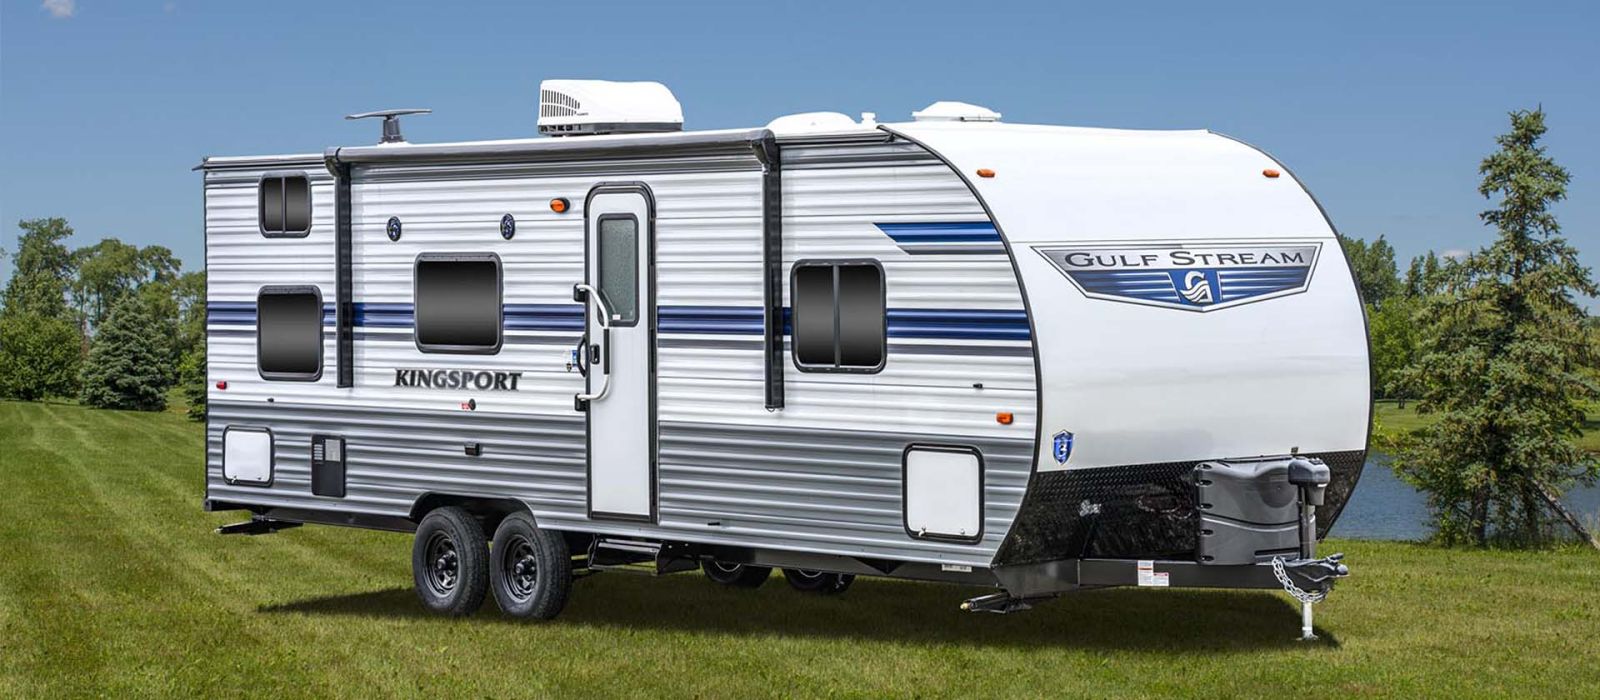 Side angle view of Gulf Stream Kingsport travel trailer